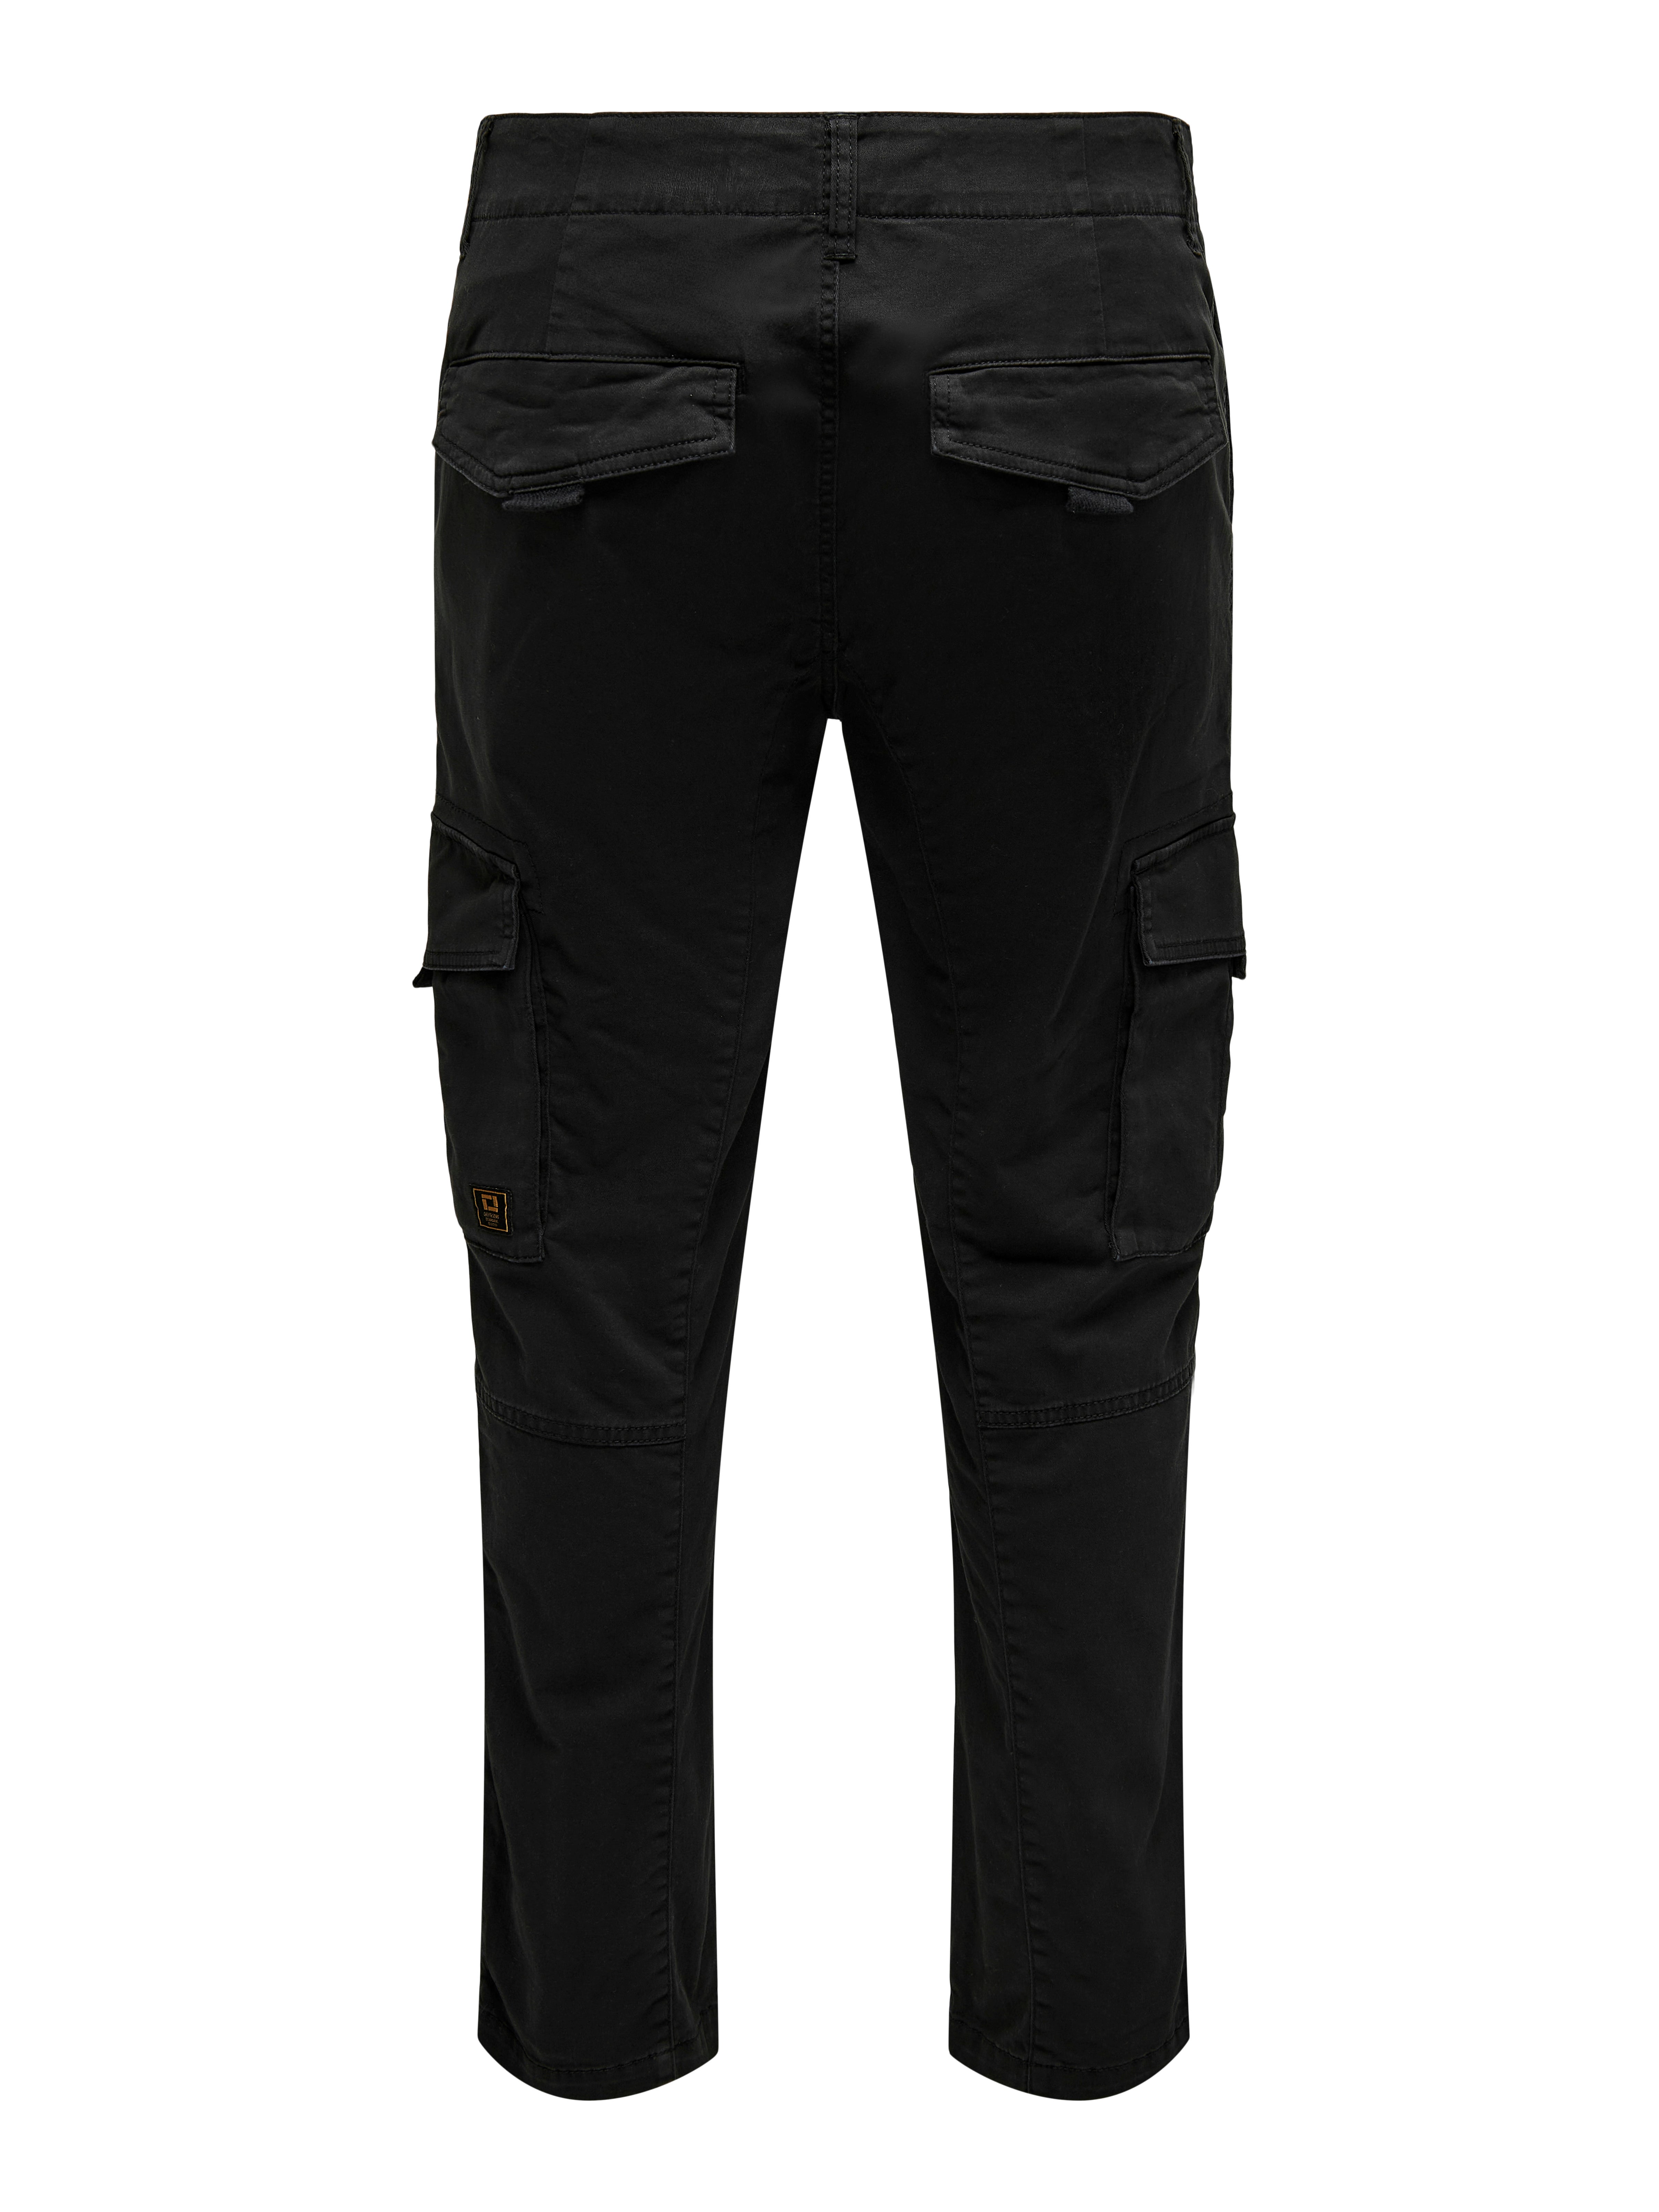 Mens Trousers Full Length in Delhi at best price by Mustin Clothing Company  - Justdial